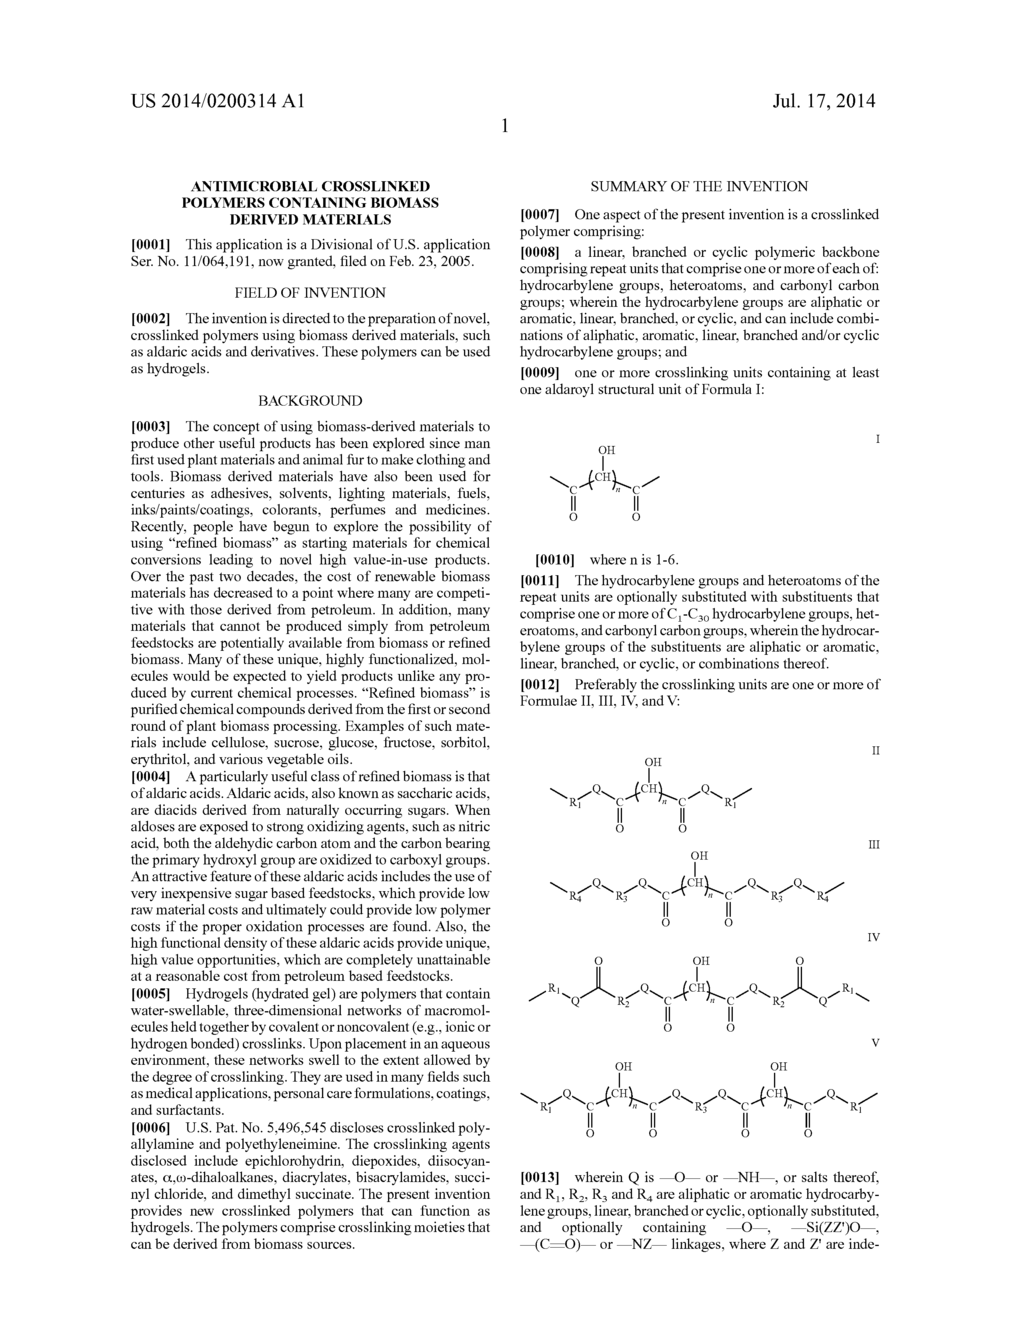 ANTIMICROBIAL CROSSLINKED POLYMERS CONTAINING BIOMASS DERIVED MATERIALS - diagram, schematic, and image 02